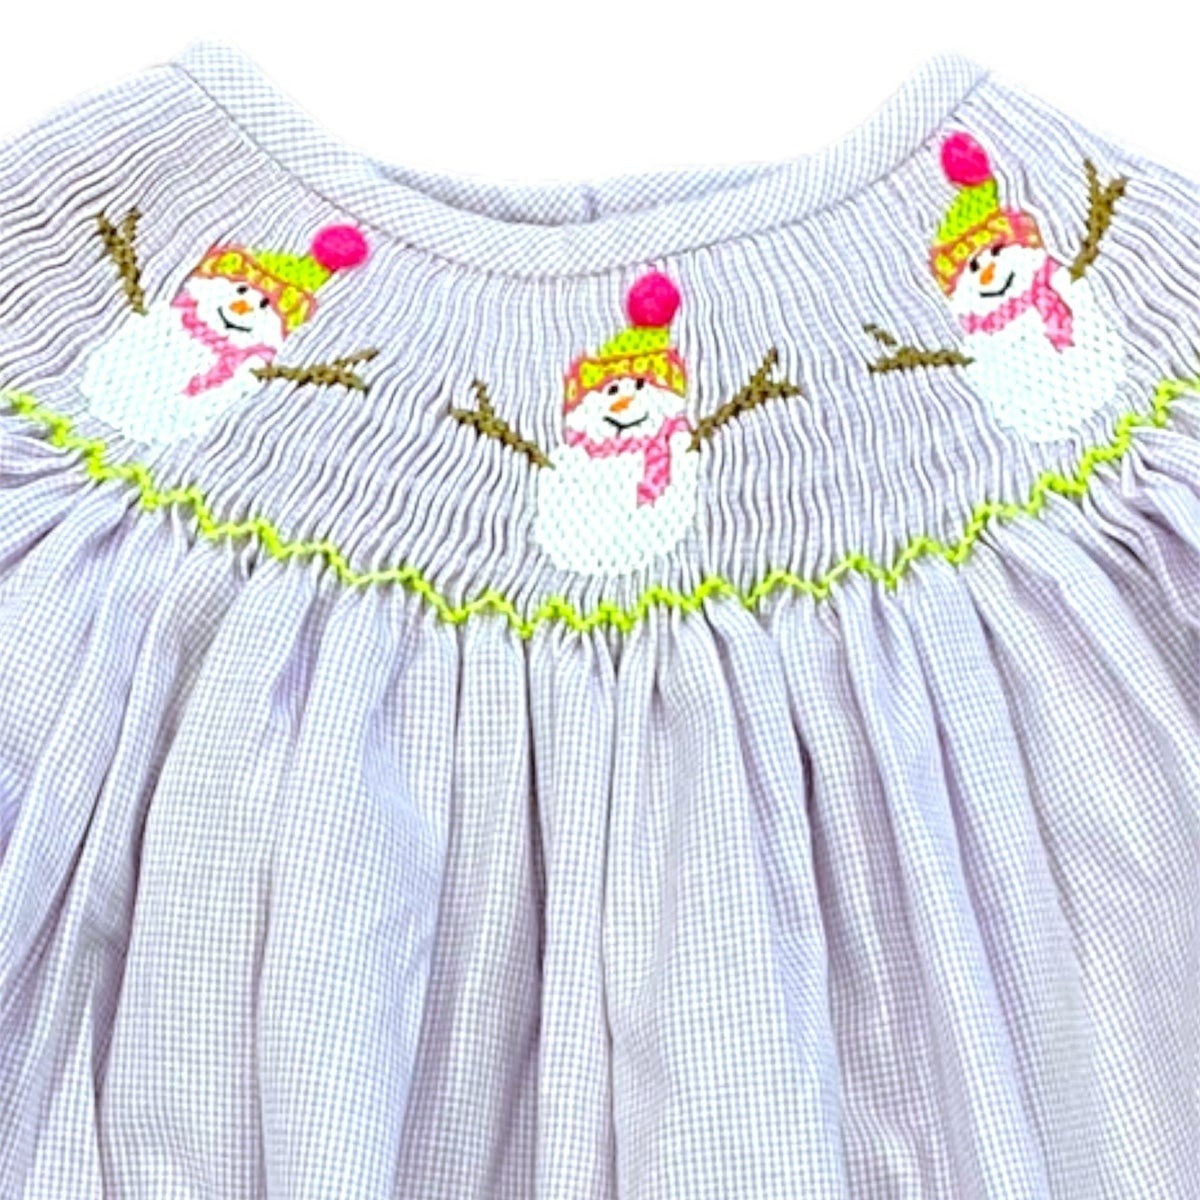 2T smocked snowman outfit